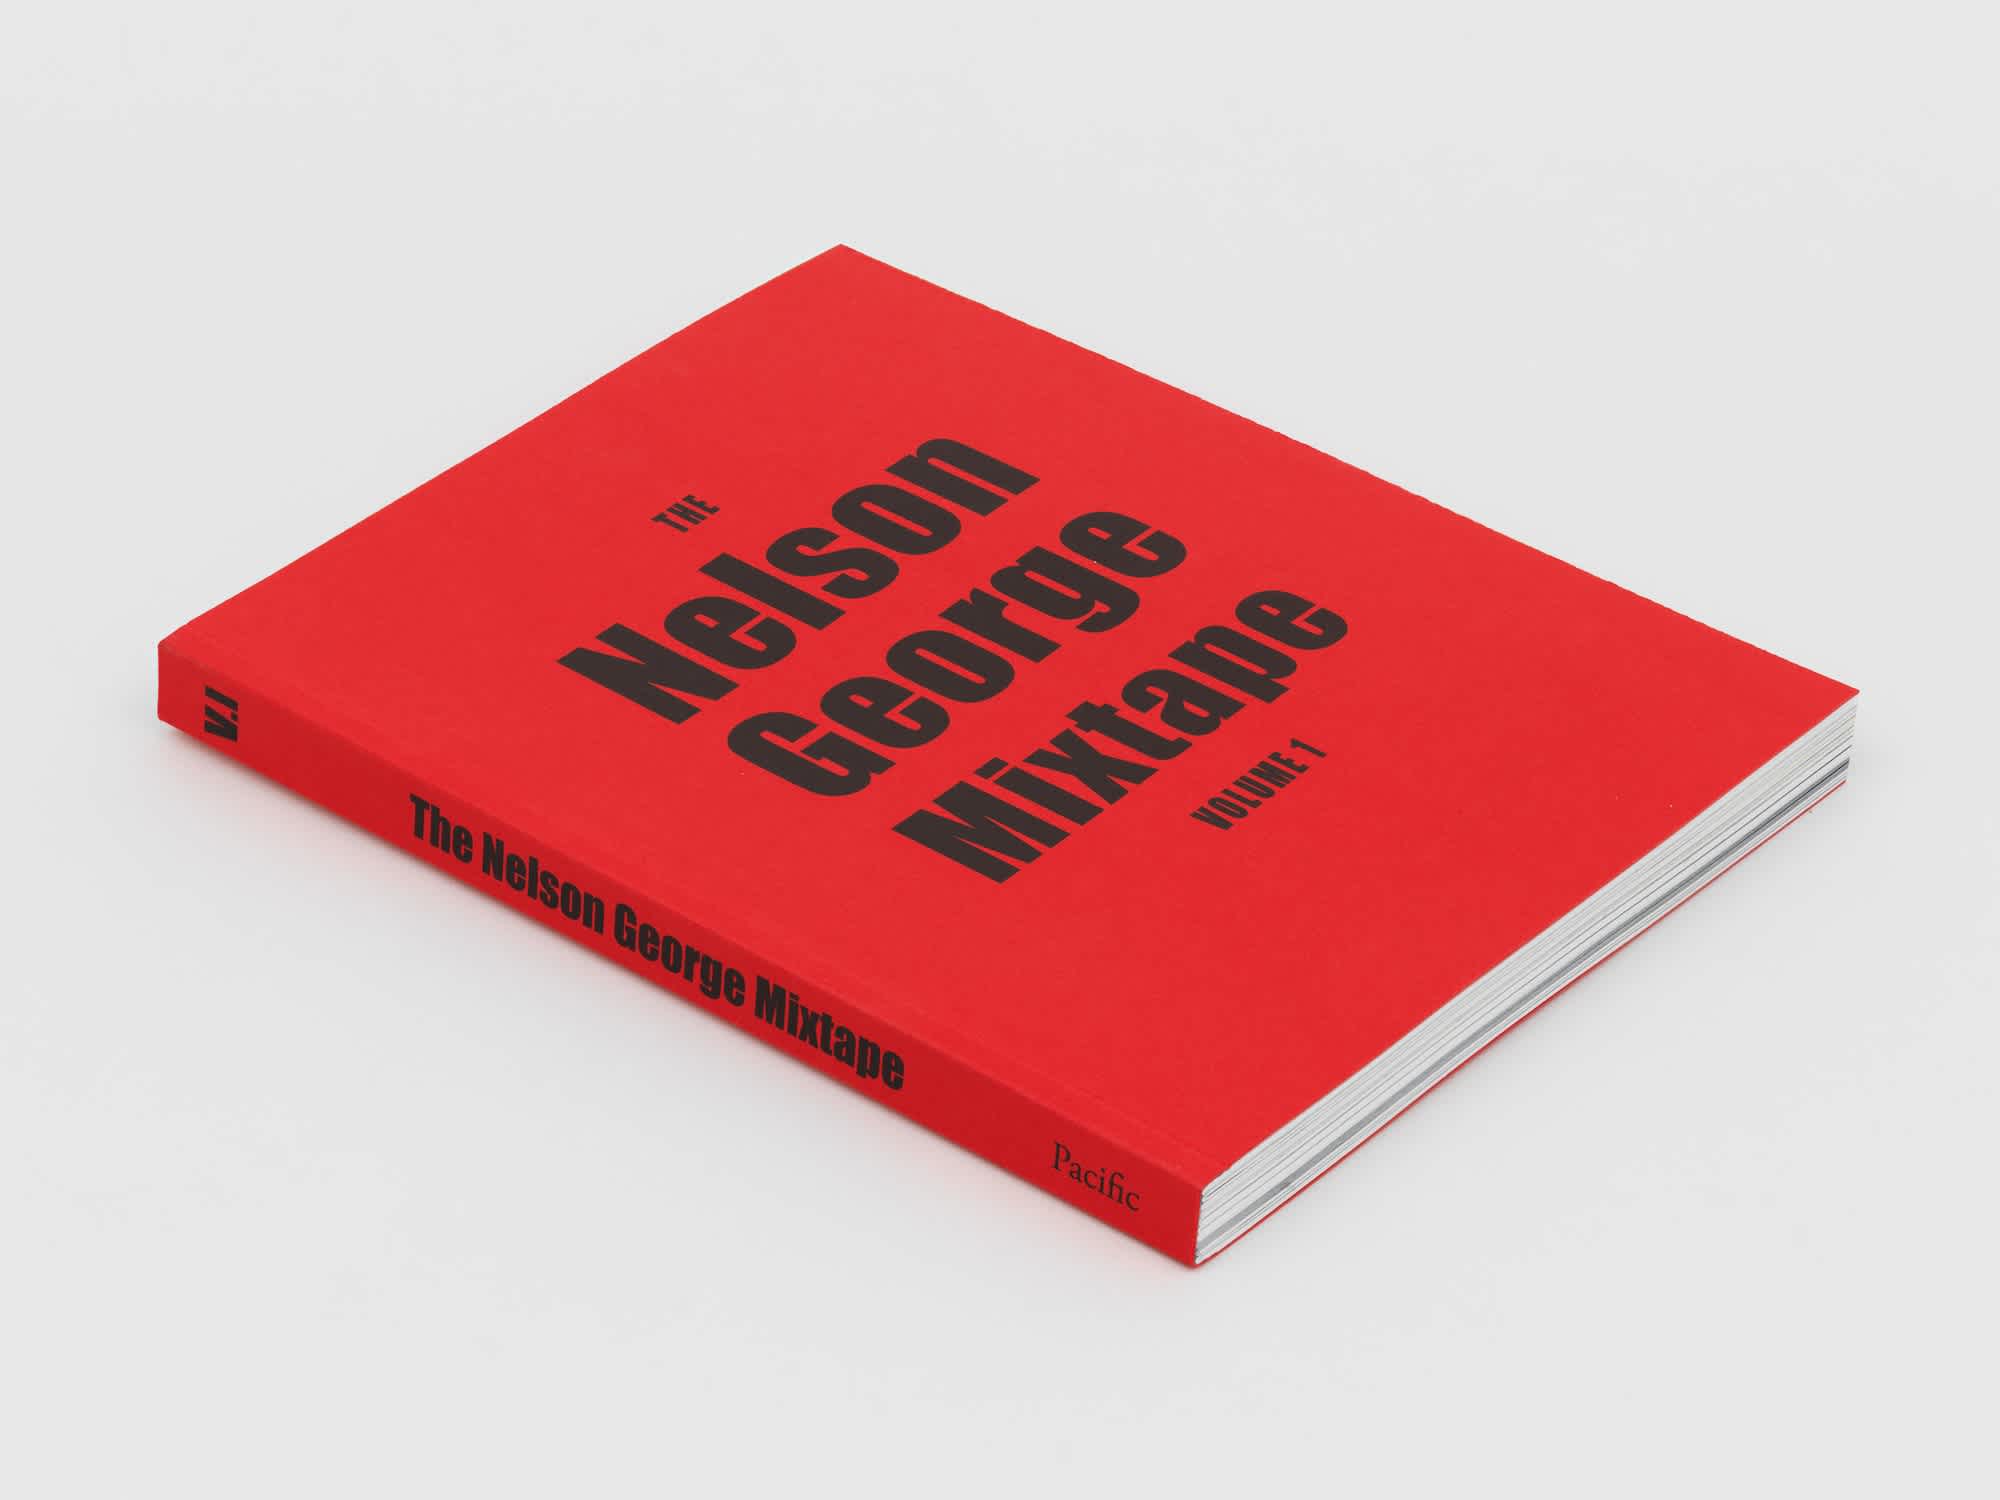 Bright red book with bold, black title, "The Nelson George Mixtape, Vol. 1" on the front cover and spine. The book lays flat on it's back, running diagonally across the plane.